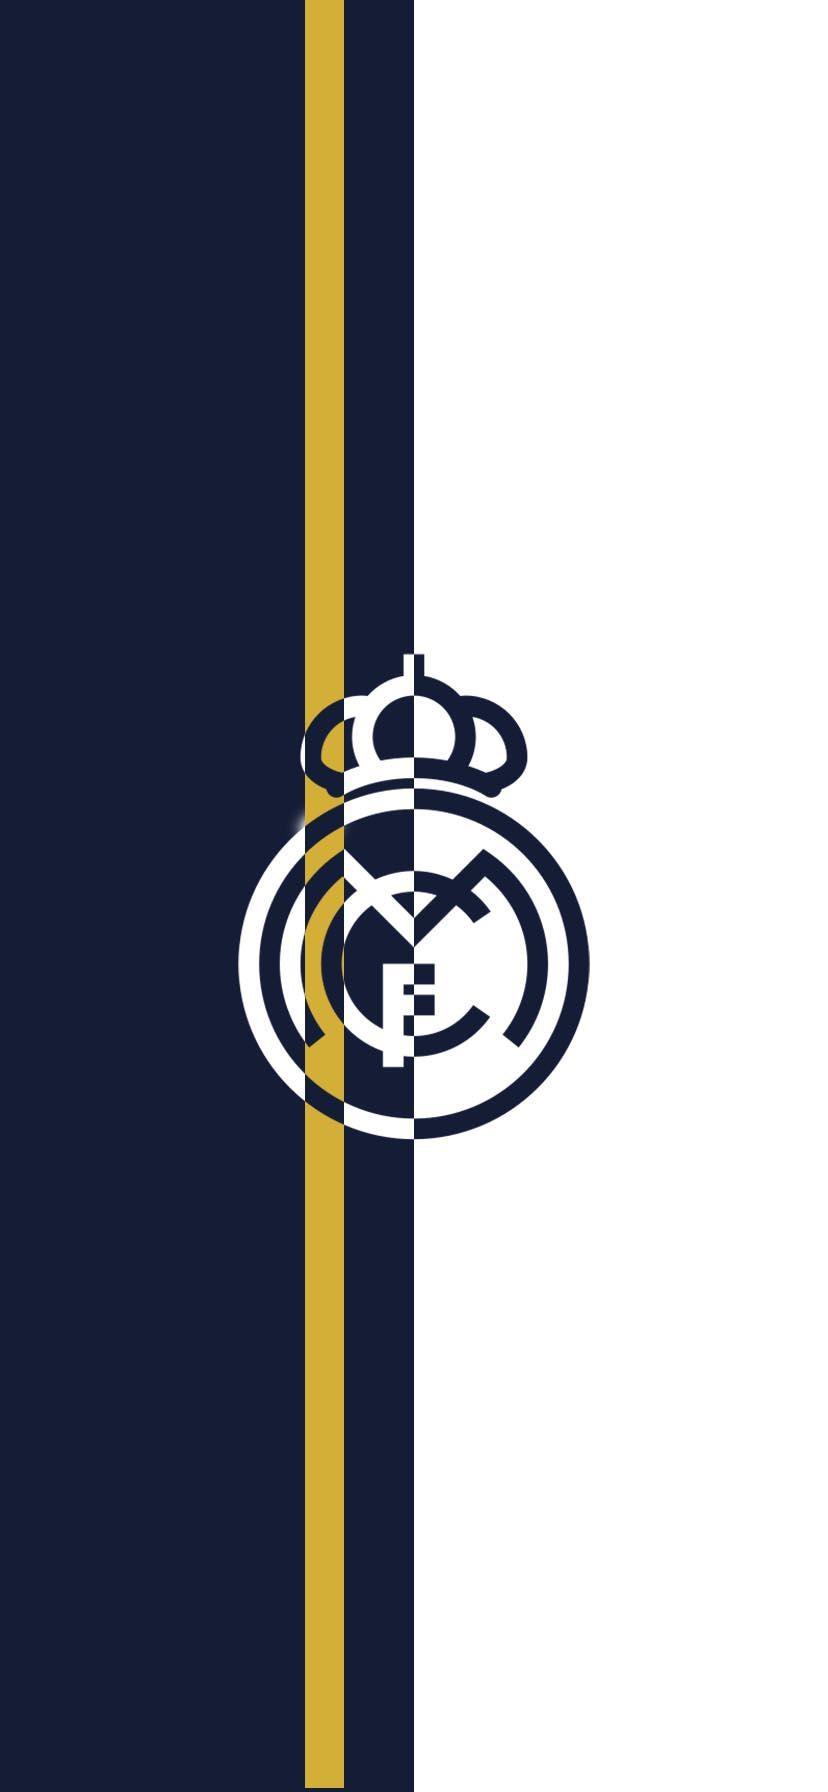 Real Madrid Wallpaper based on a mash of Home and Away kits 2019